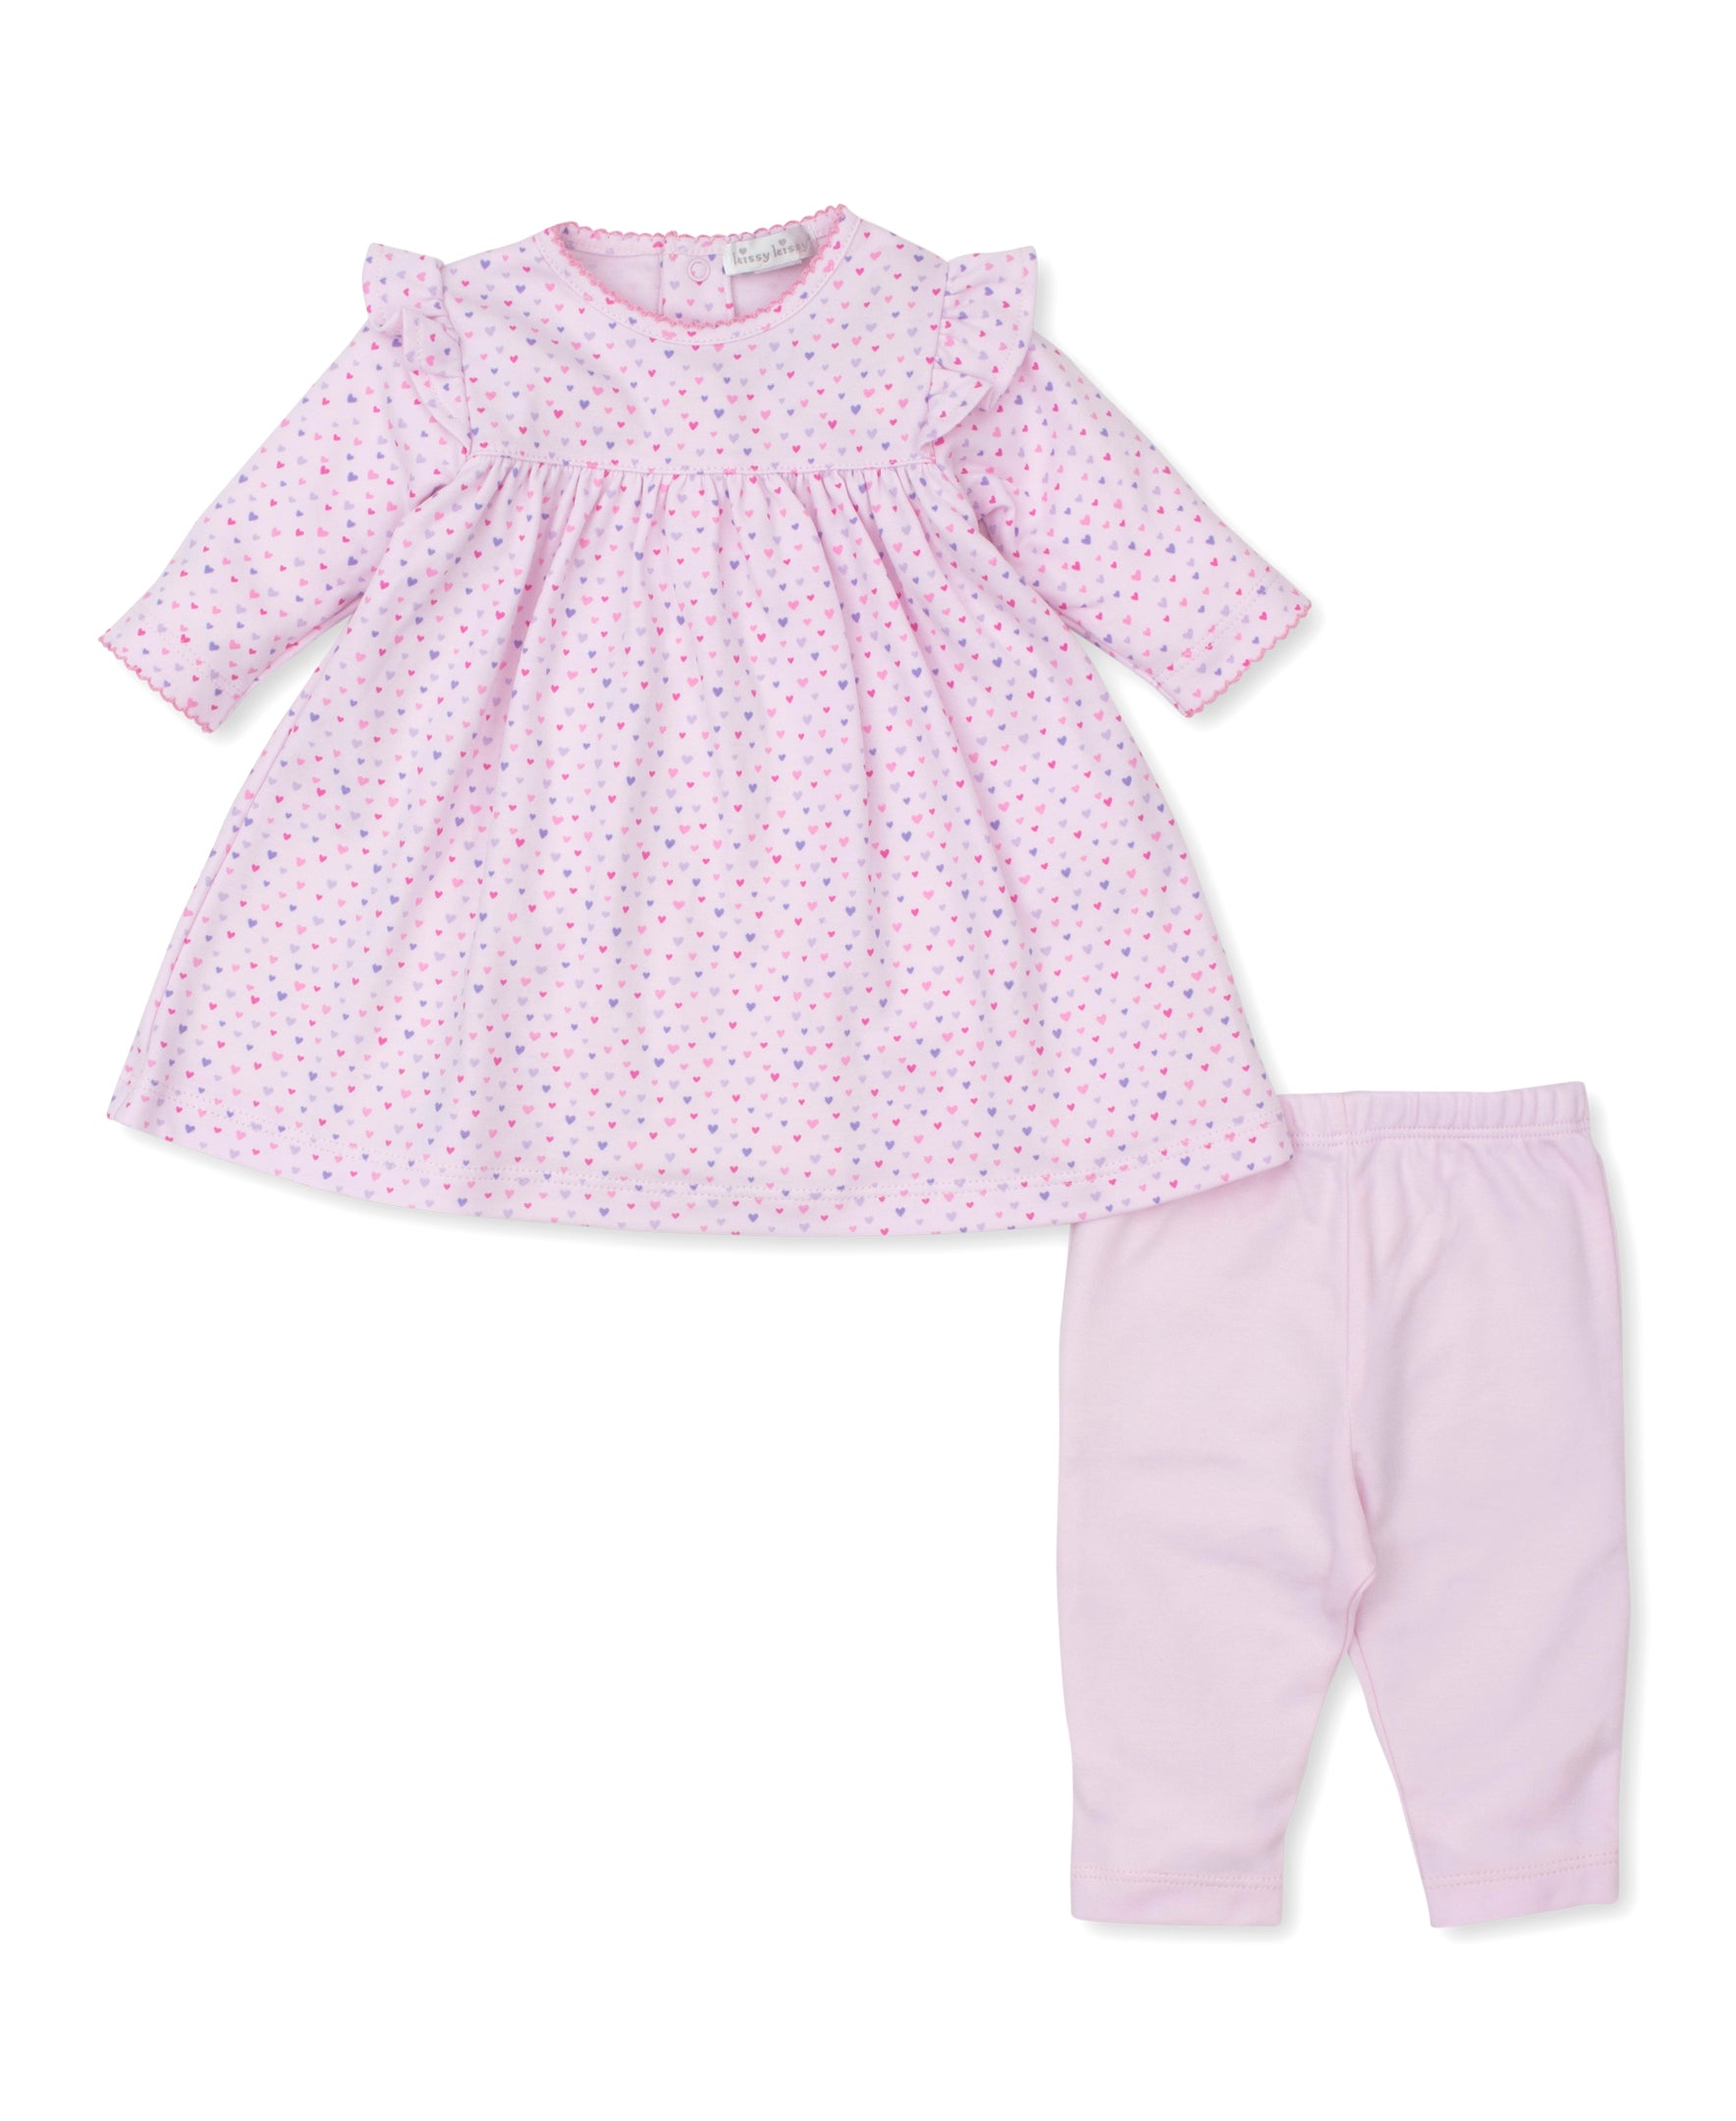 Castles In The Clouds Dress Set - Kissy Kissy